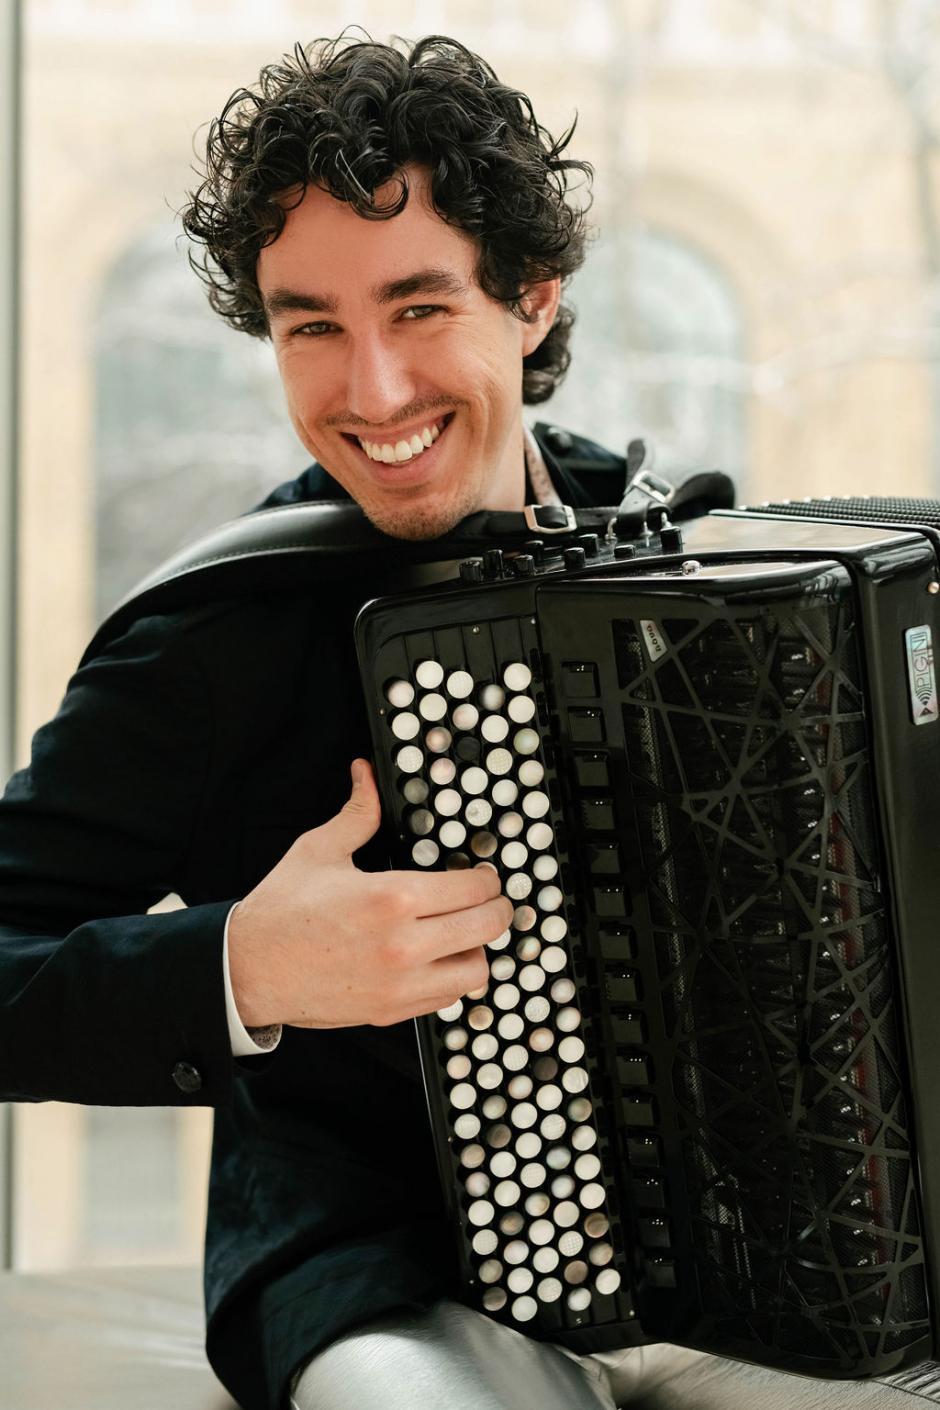 Michael Bridge is playing a black accordion and smiling at the camera